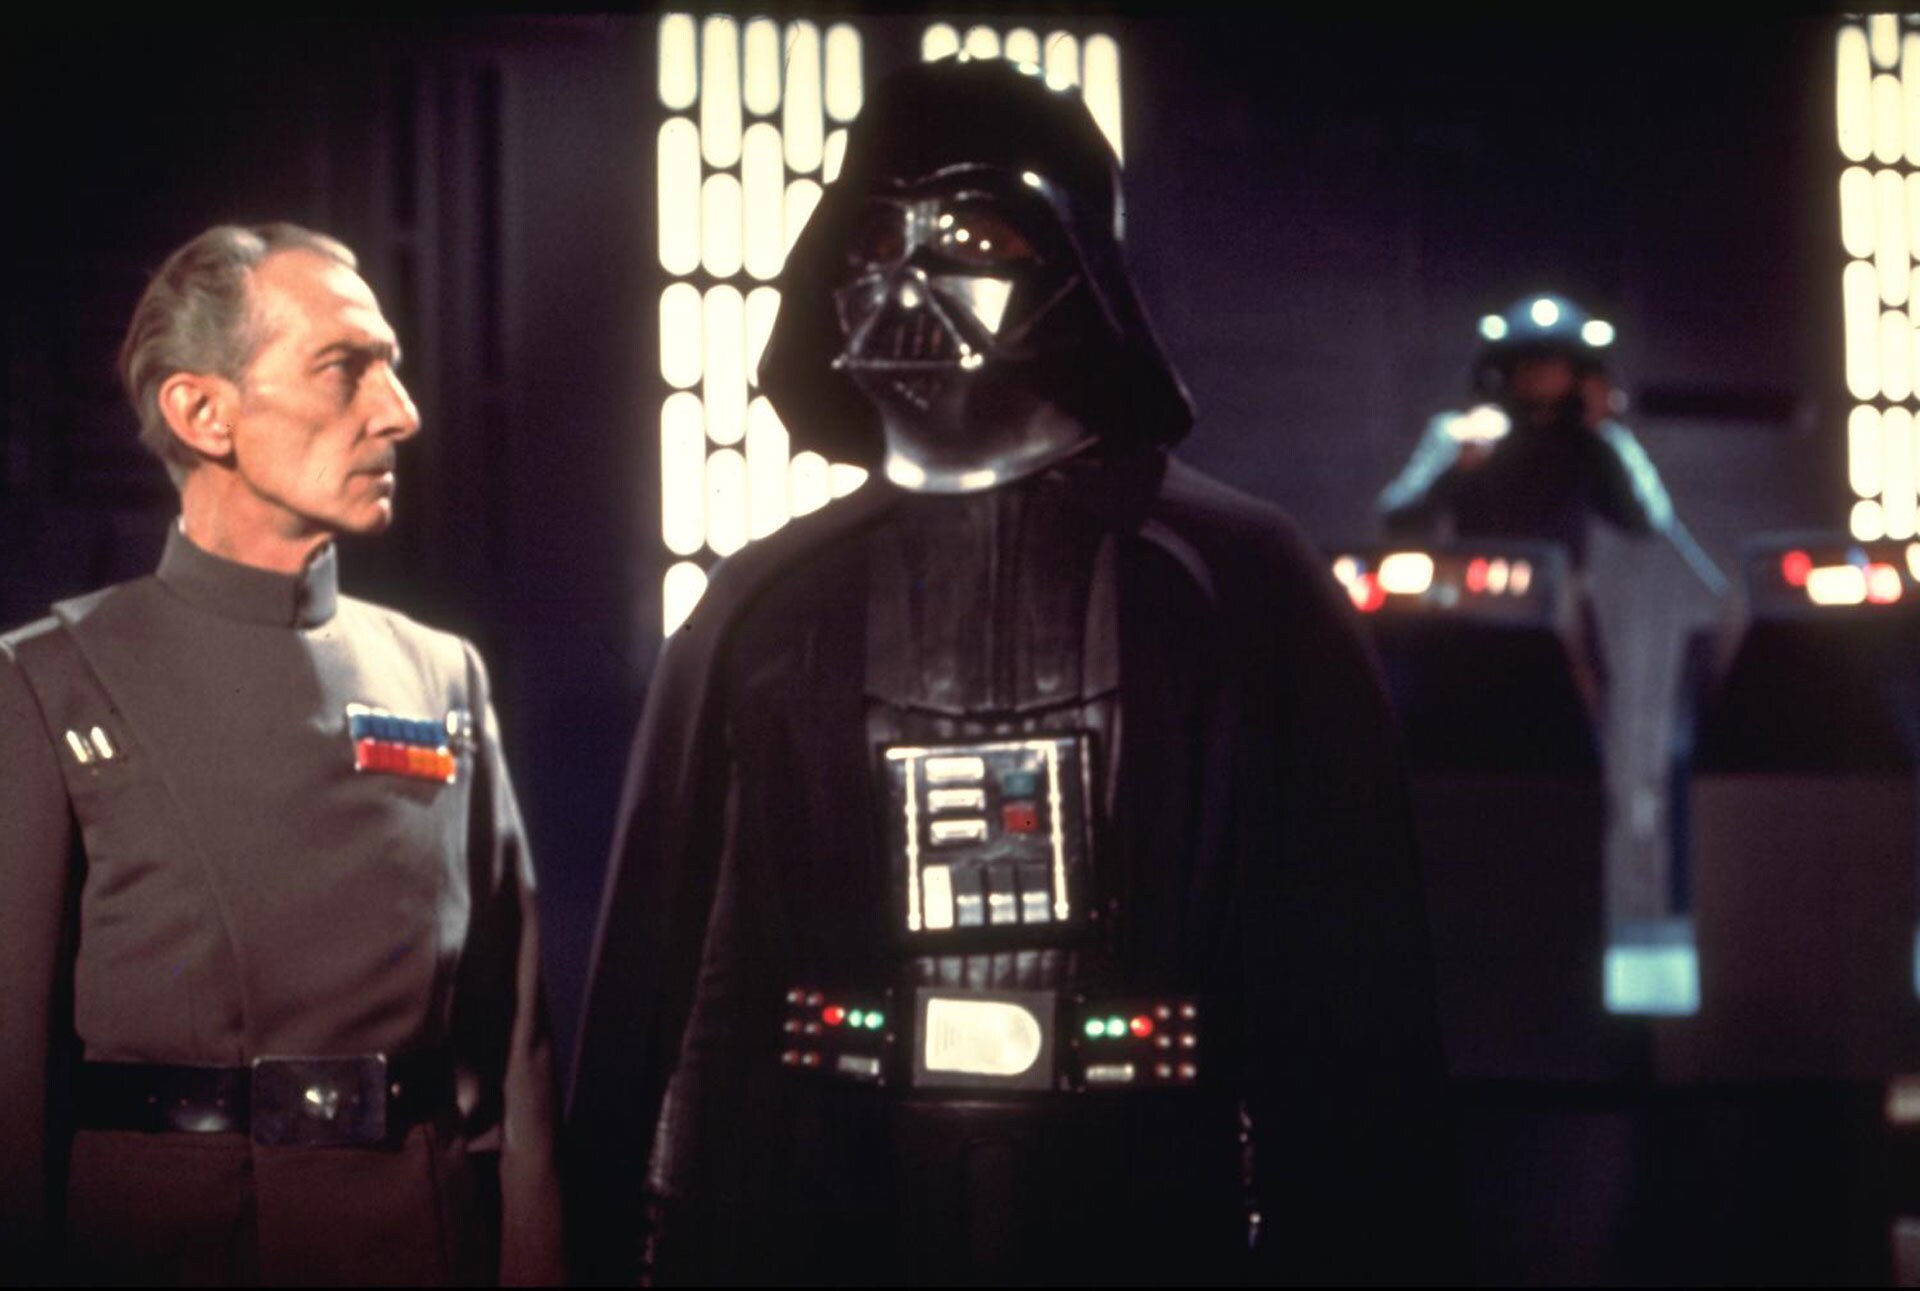 Tarkin became one of the most powerful Imperial leaders, attracting followers such as the ruthles...